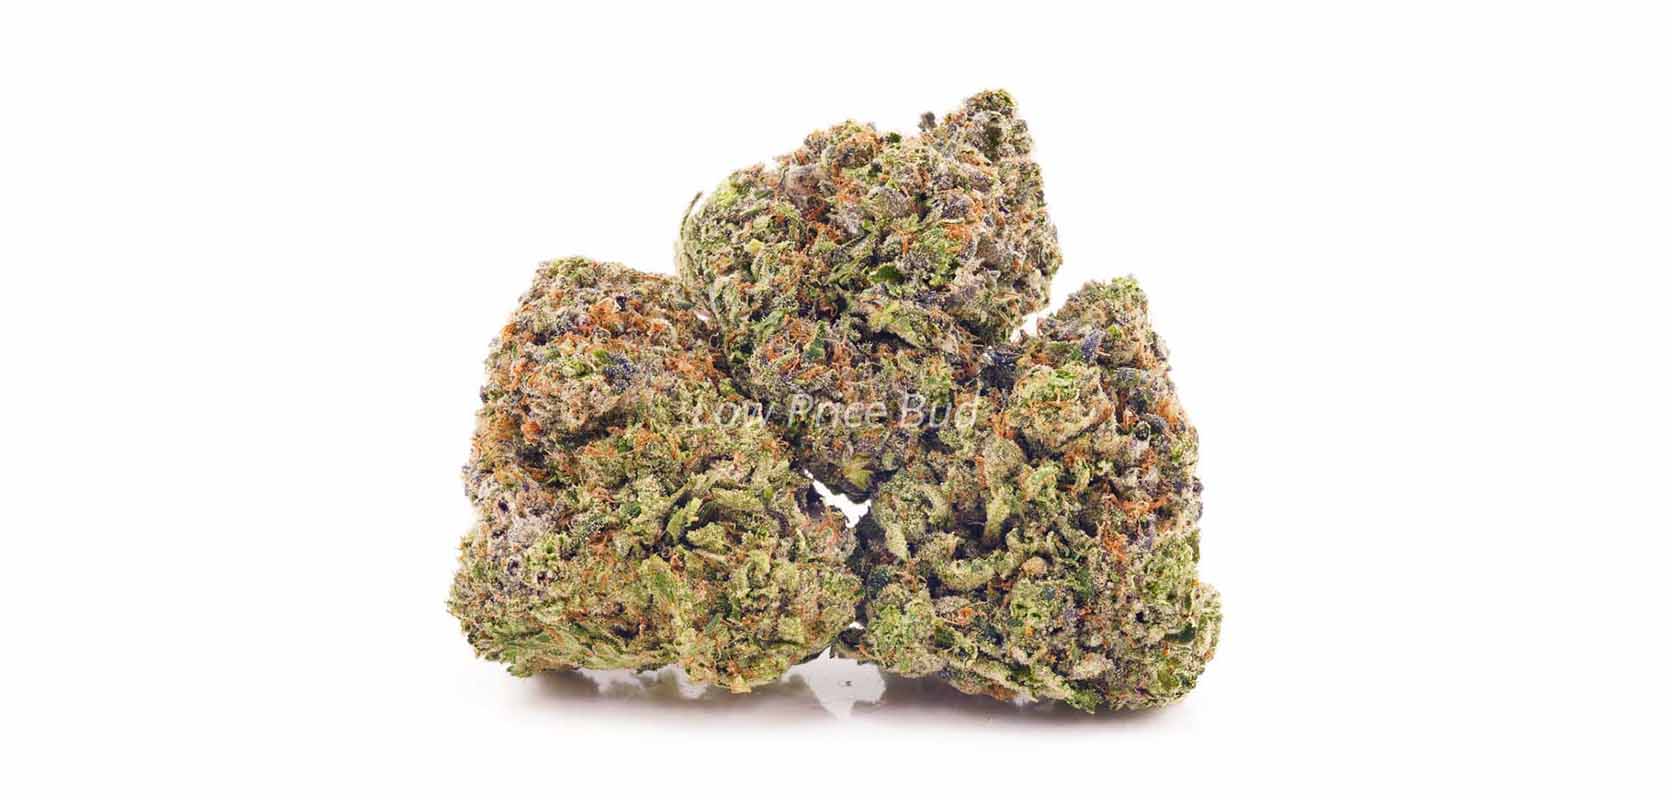 Couch-Lock weed online in Canada from BC cannabis online dispensary Low Price Bud mail order marijuana weed store.